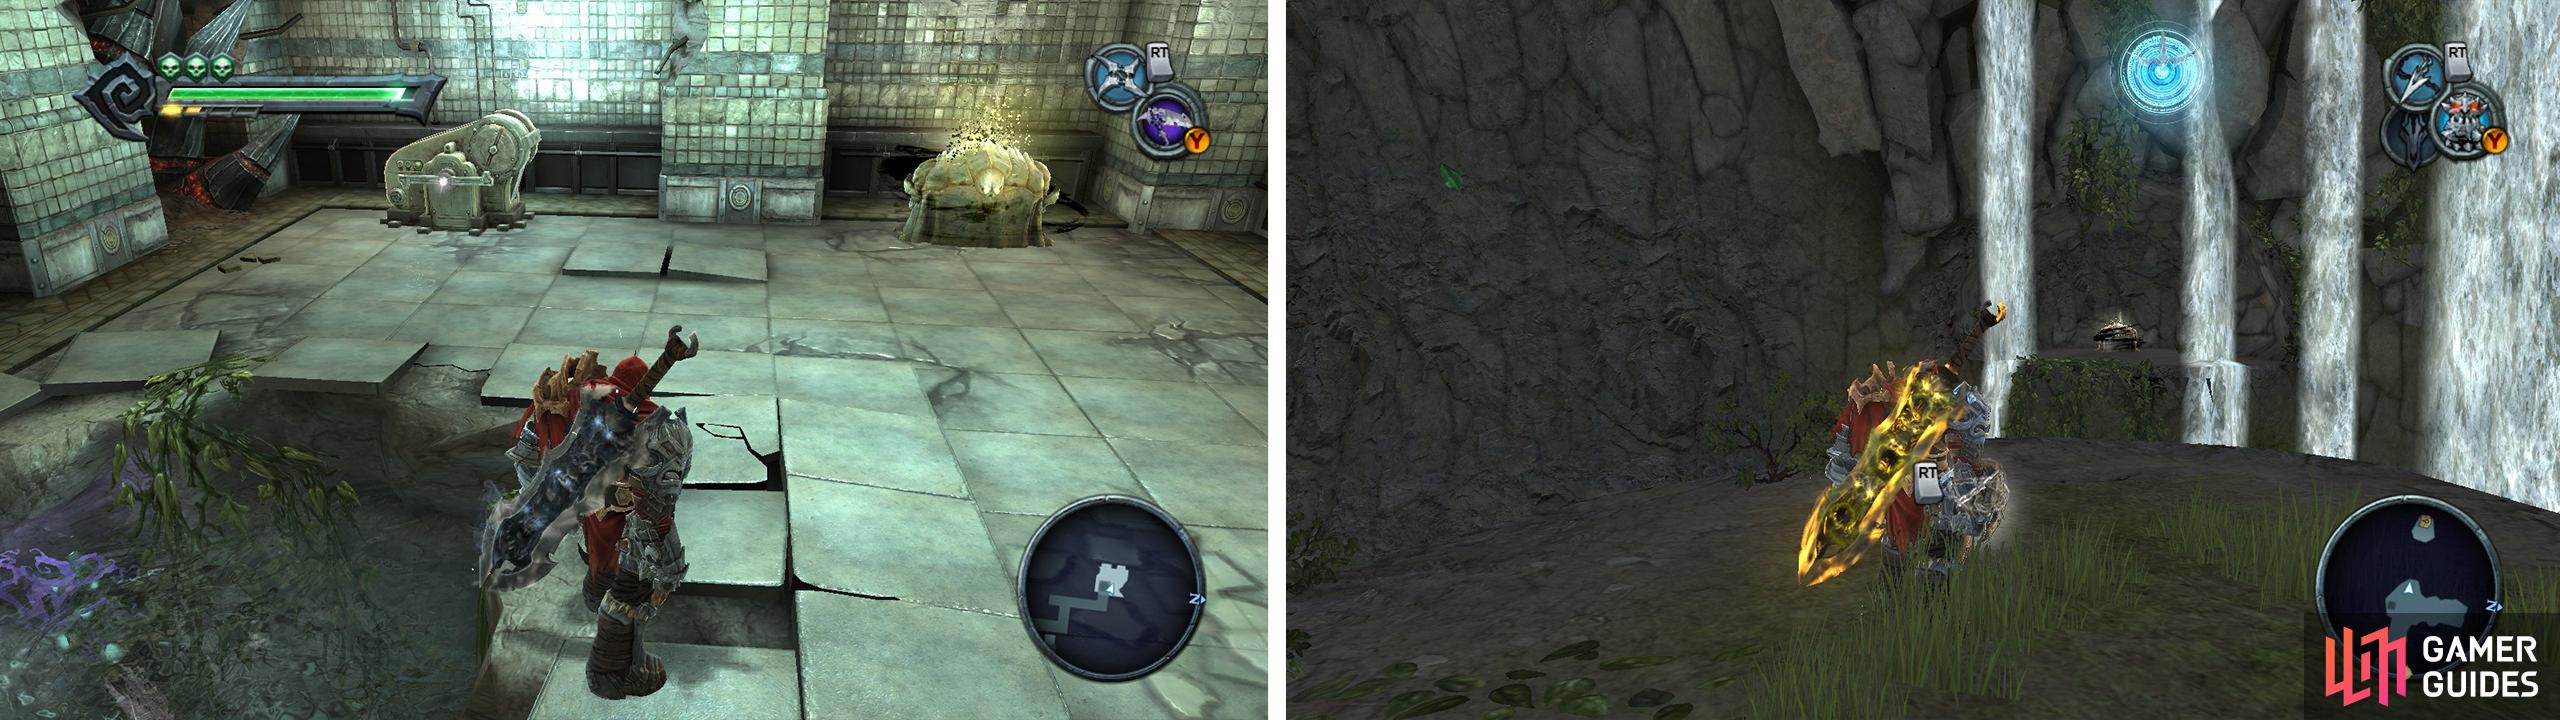 The Hollows: by the switch to turn off the fan in the underwater tunnels (left). Anvil’s Ford: on a small floating island on the west side of the map (right) you’ll need the Abyssal Chain to reach it.